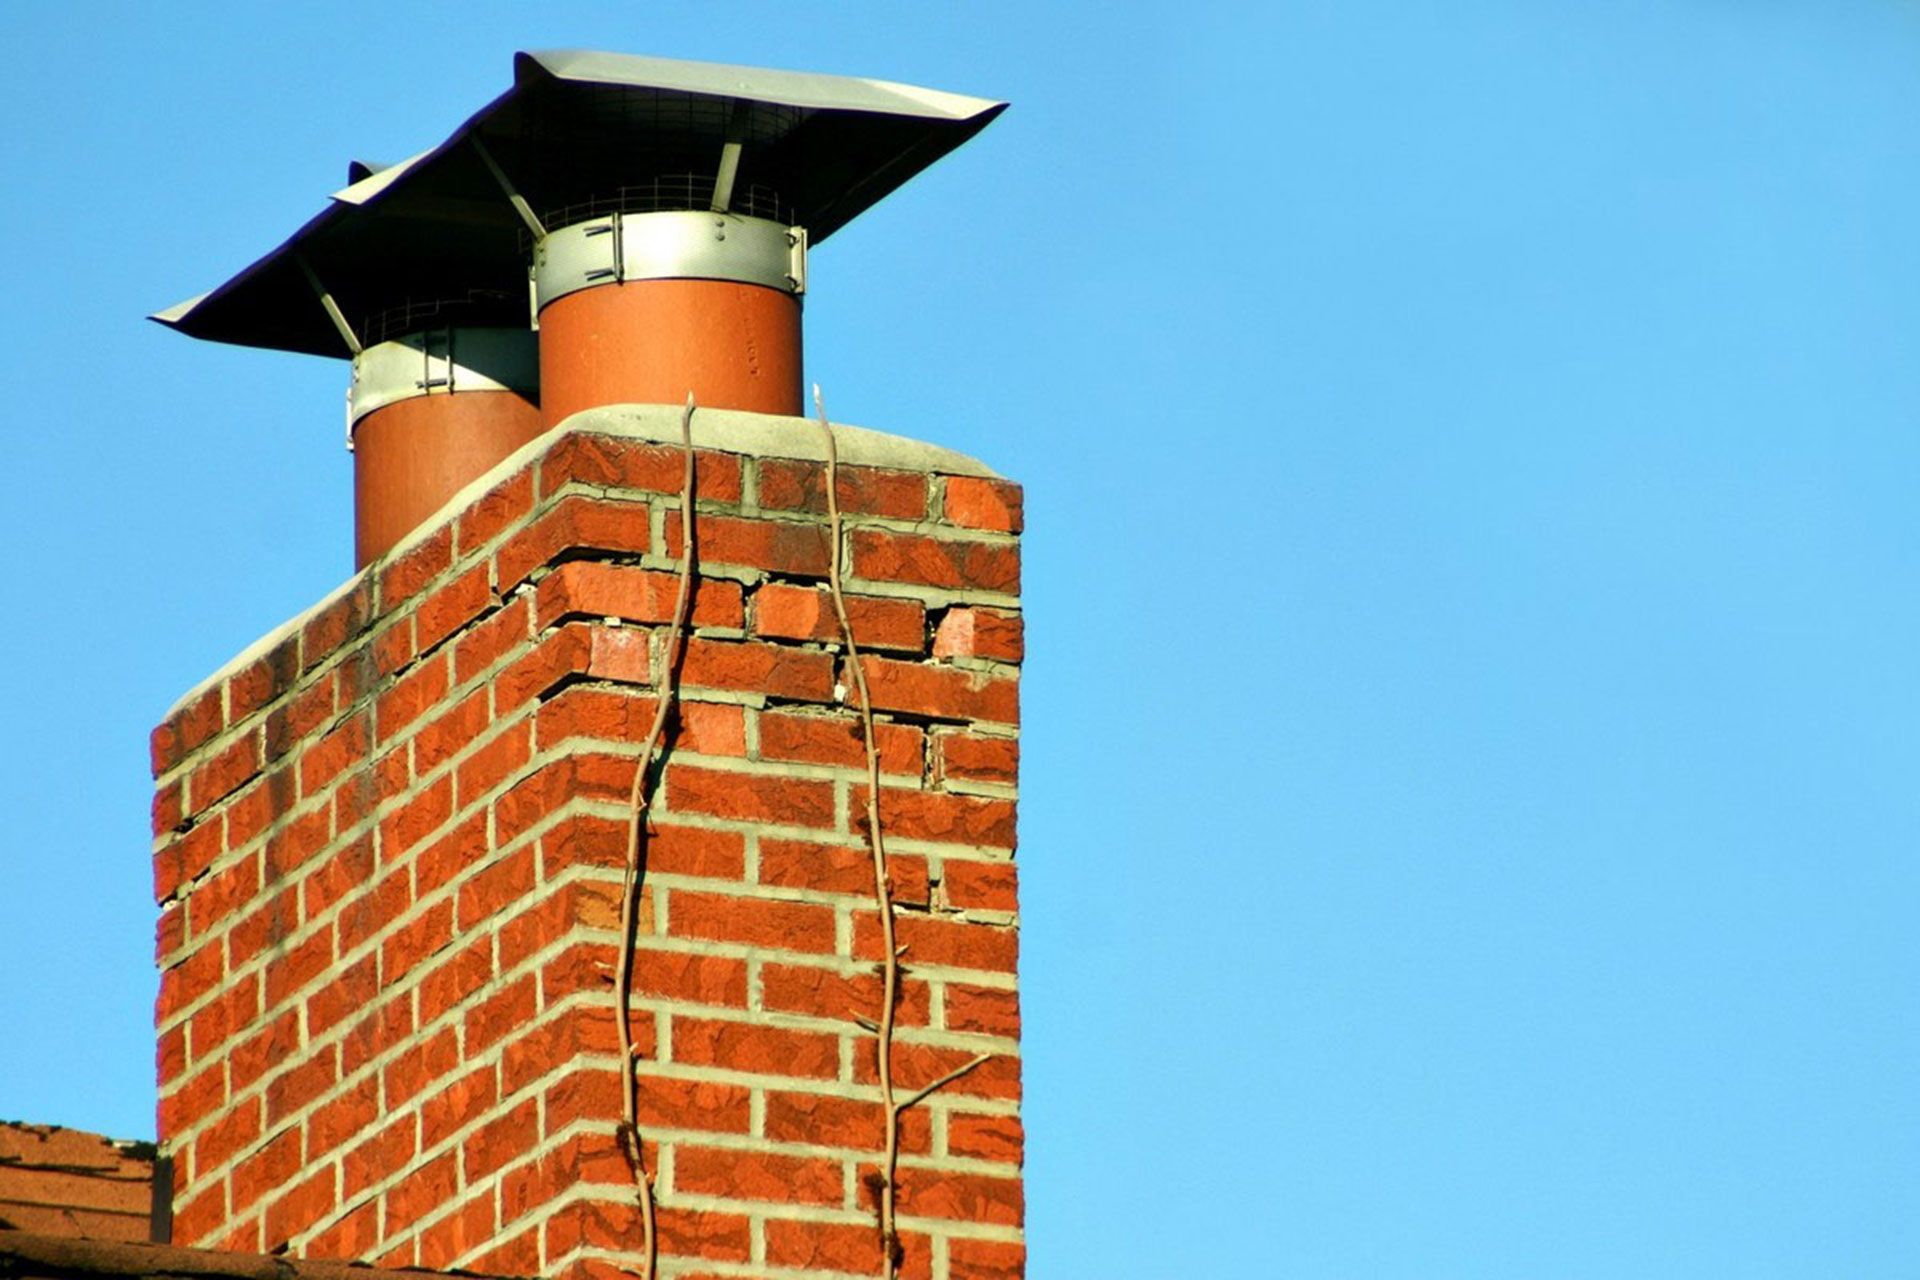 Chimney repair and tuckpointing